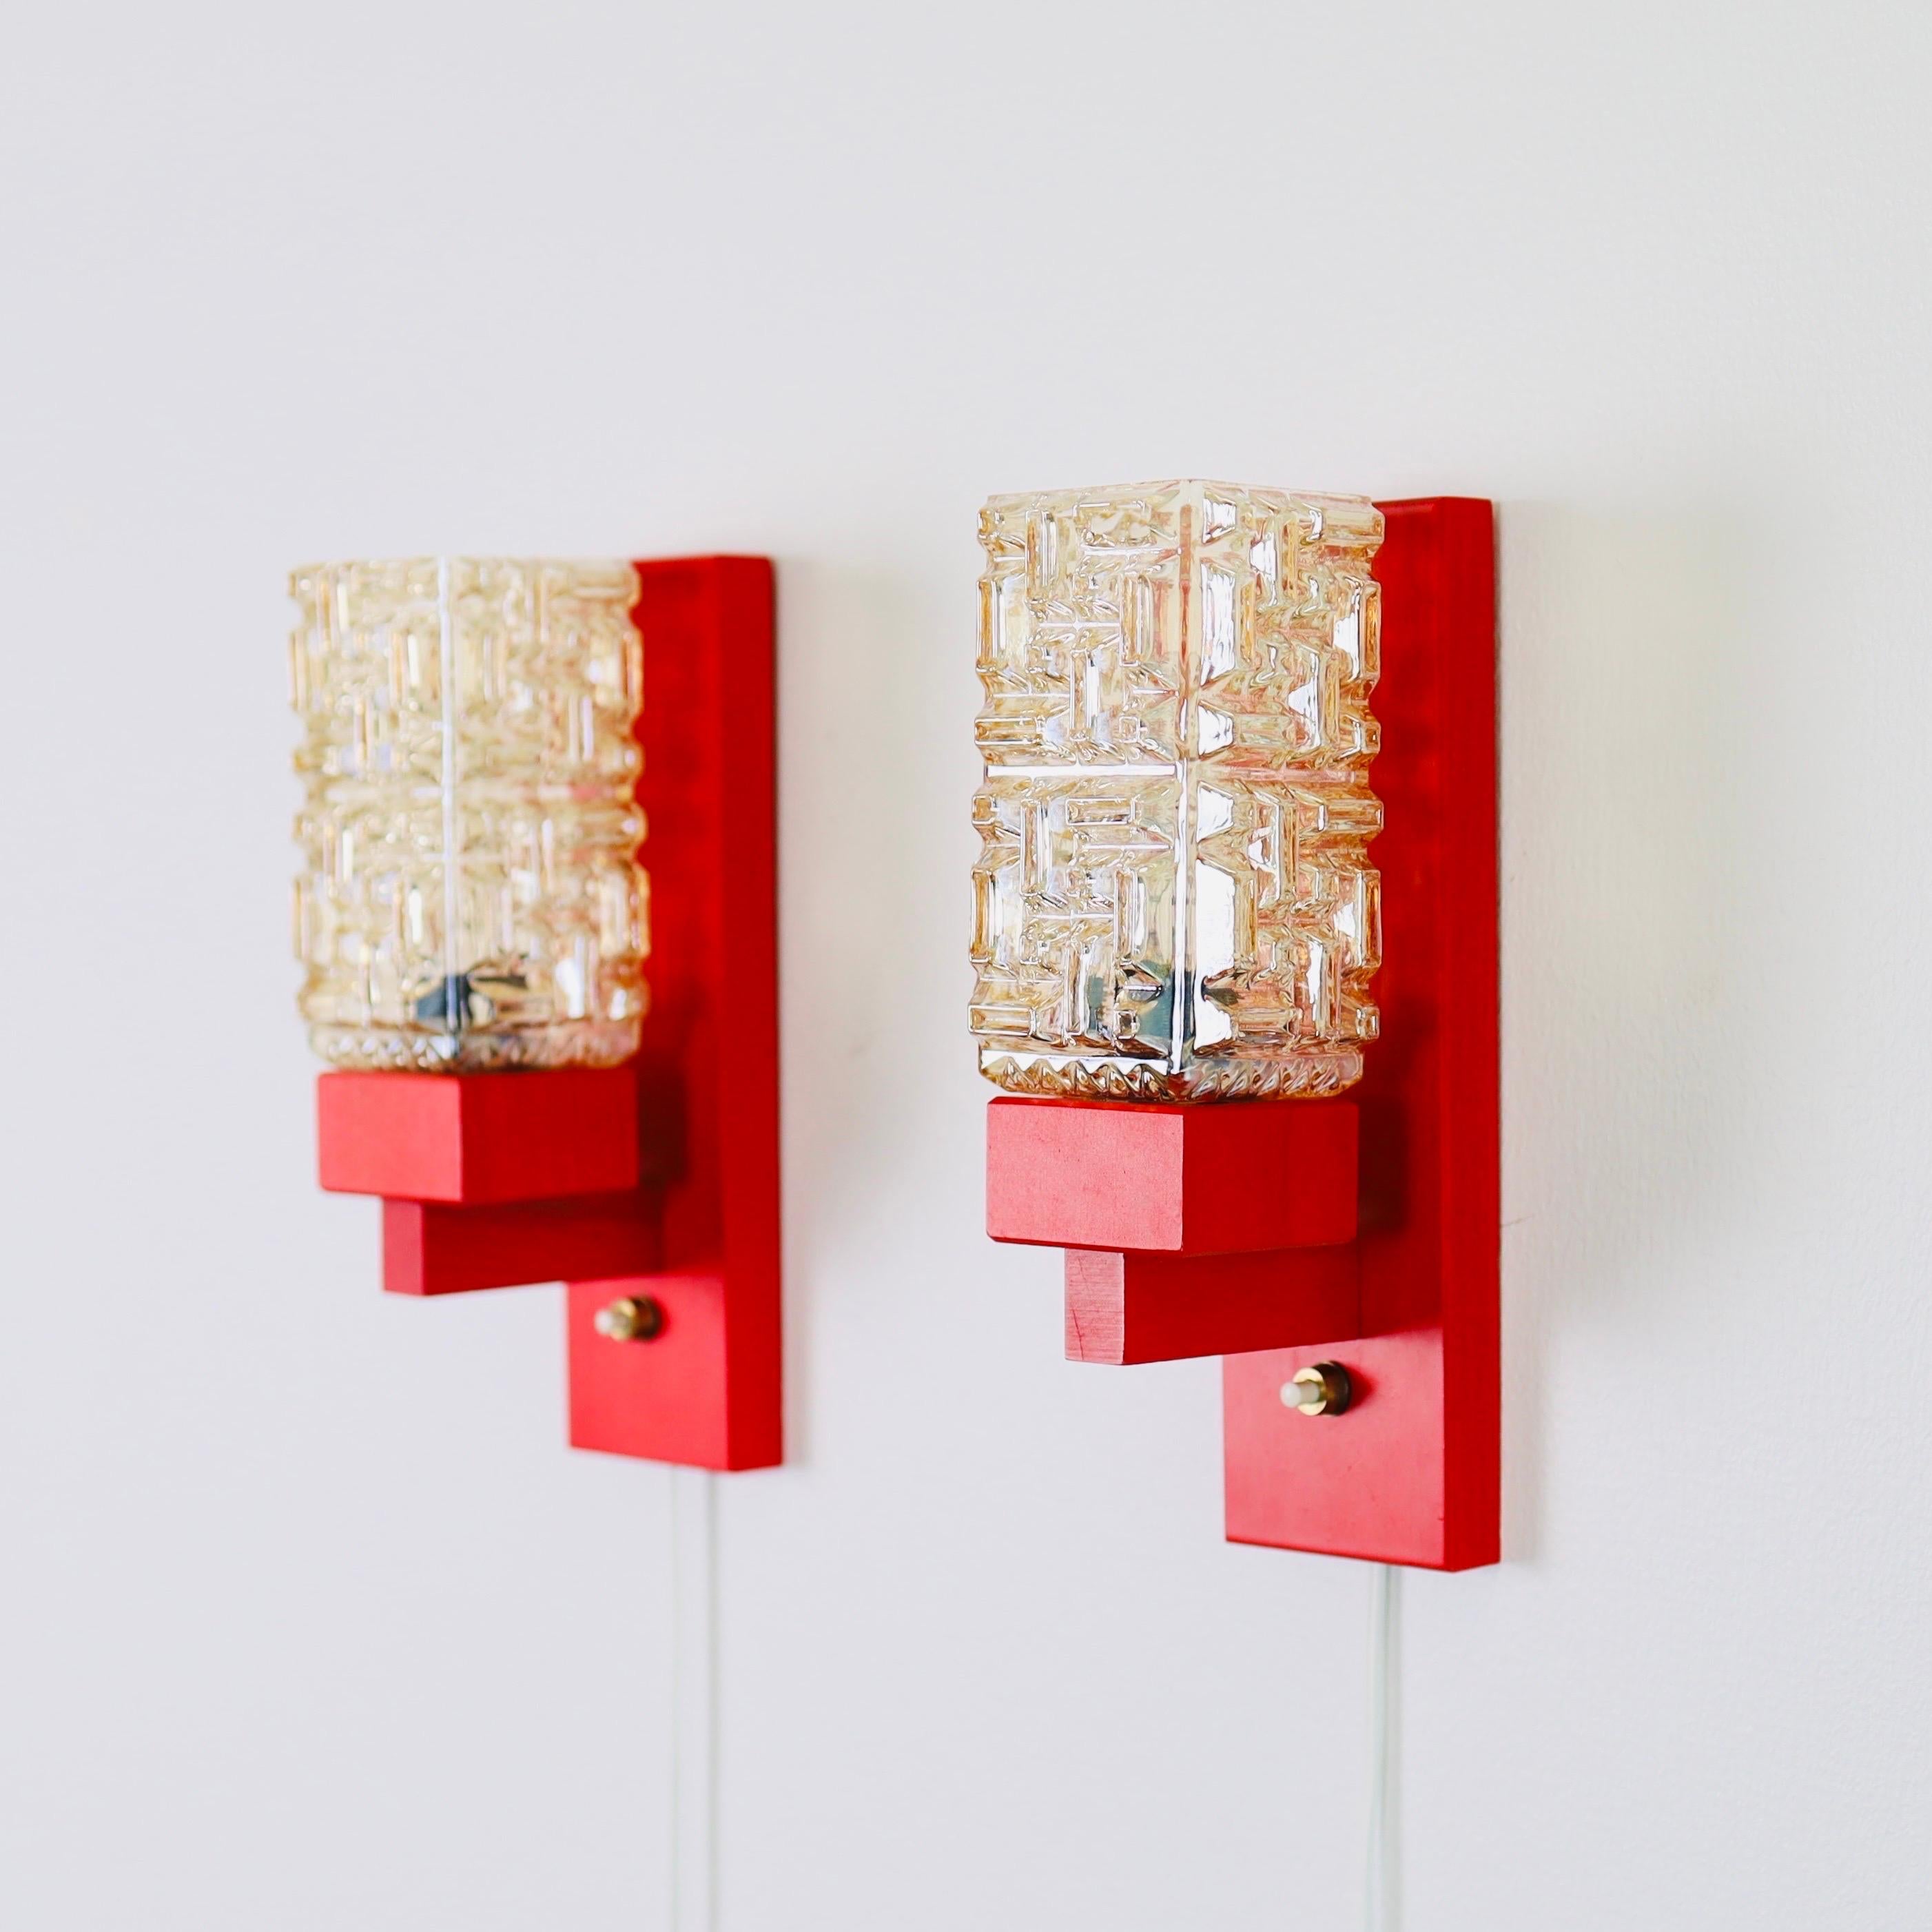 Set of 'Vitrika' Wall Lamps in Red stained wood & Amber Glass, Denmark, 1970s For Sale 6